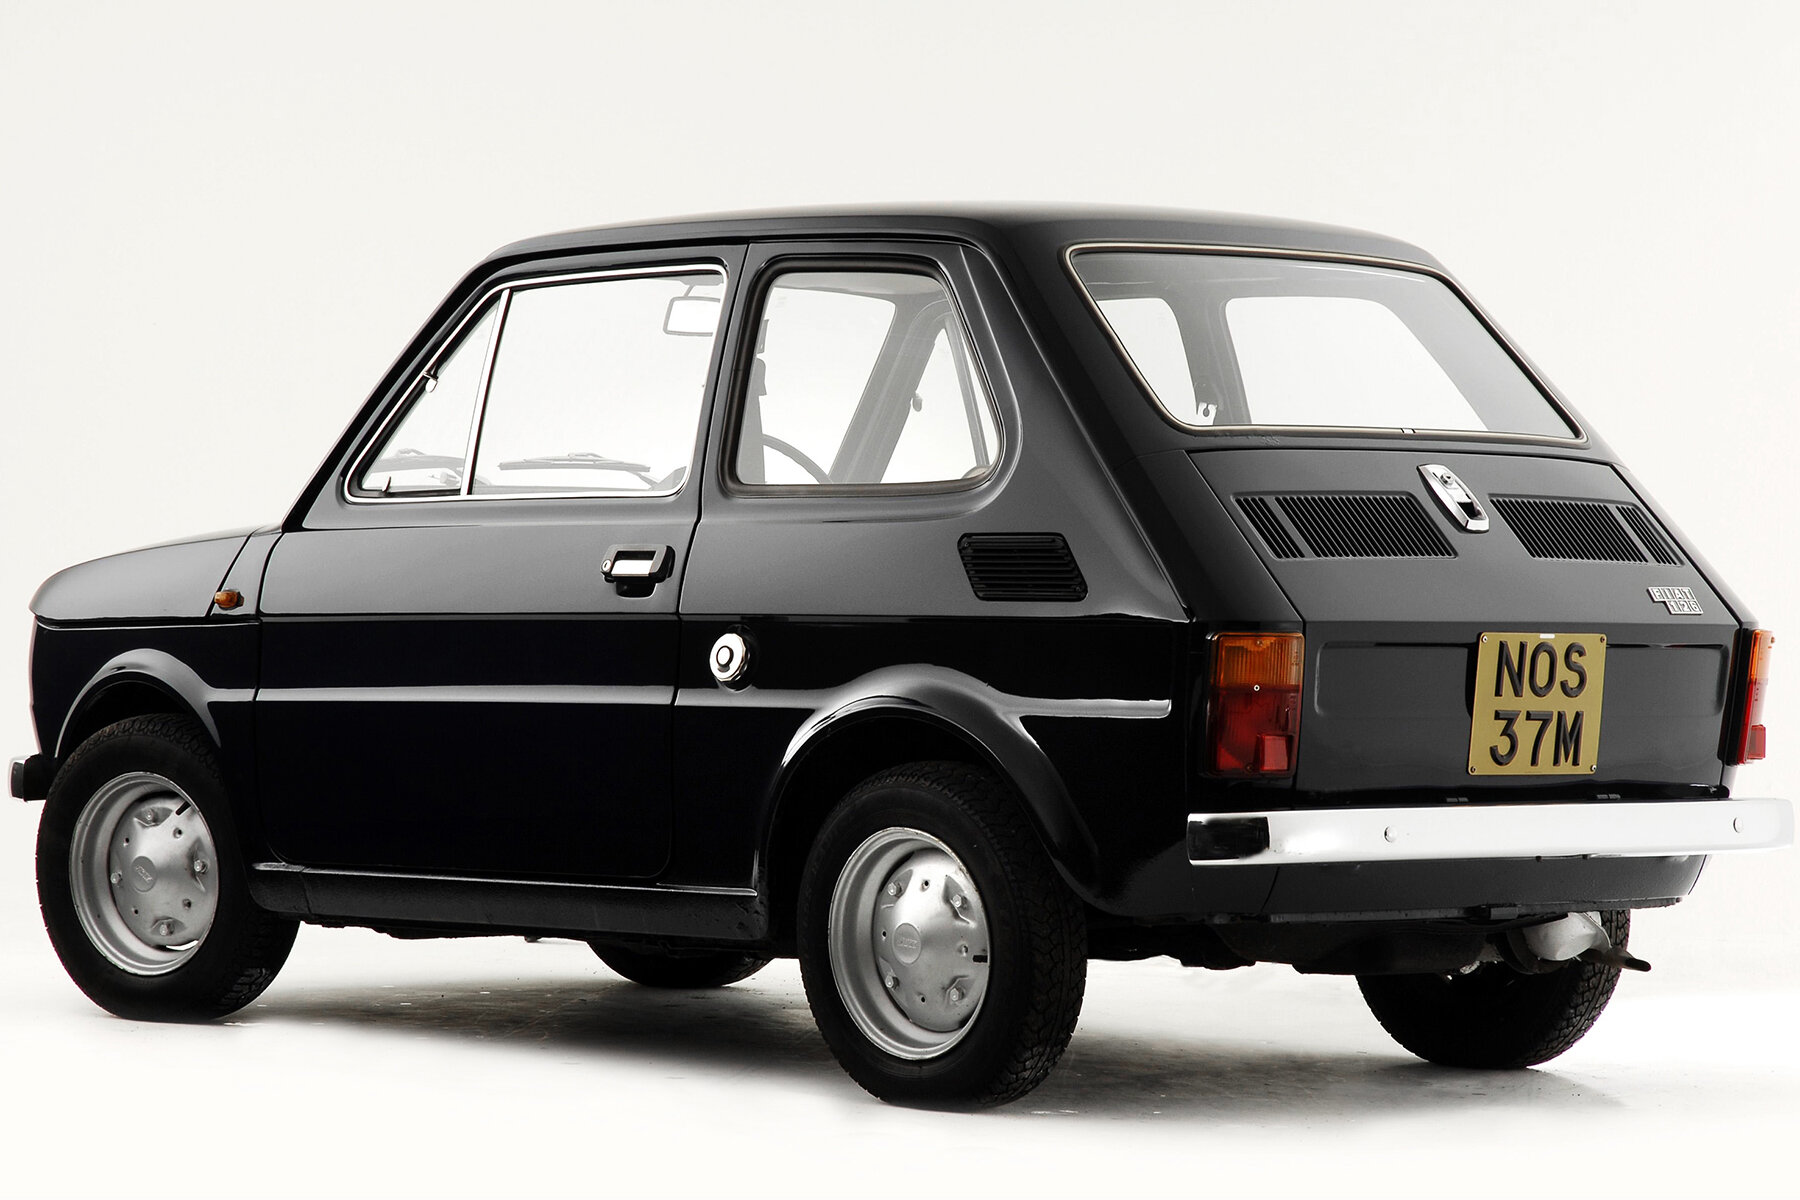 It’s a great-looking piece of design, but is the Fiat 126 good enough for your classic car needs?